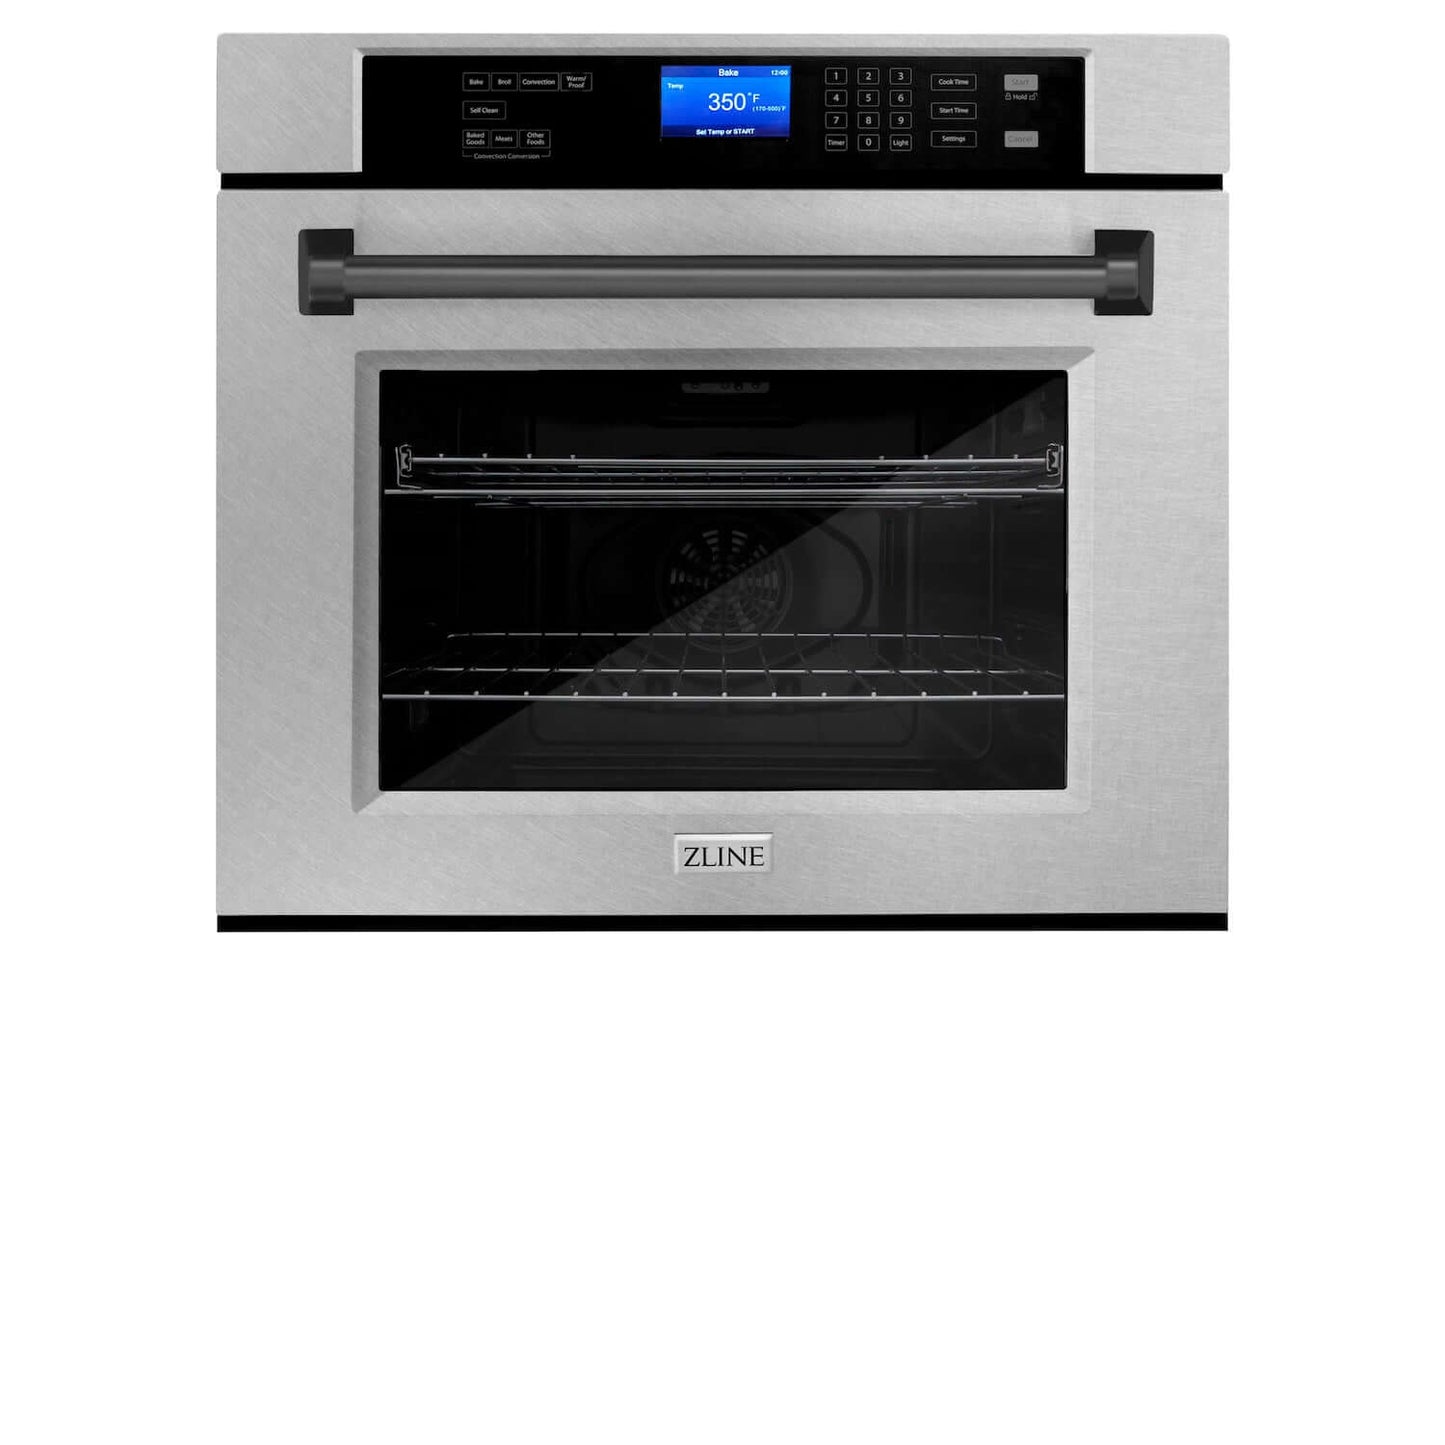 ZLINE 30 in. Autograph Edition Electric Single Wall Oven with Self Clean and True Convection in Fingerprint Resistant Stainless Steel and Matte Black Accents (AWSSZ-30-MB)